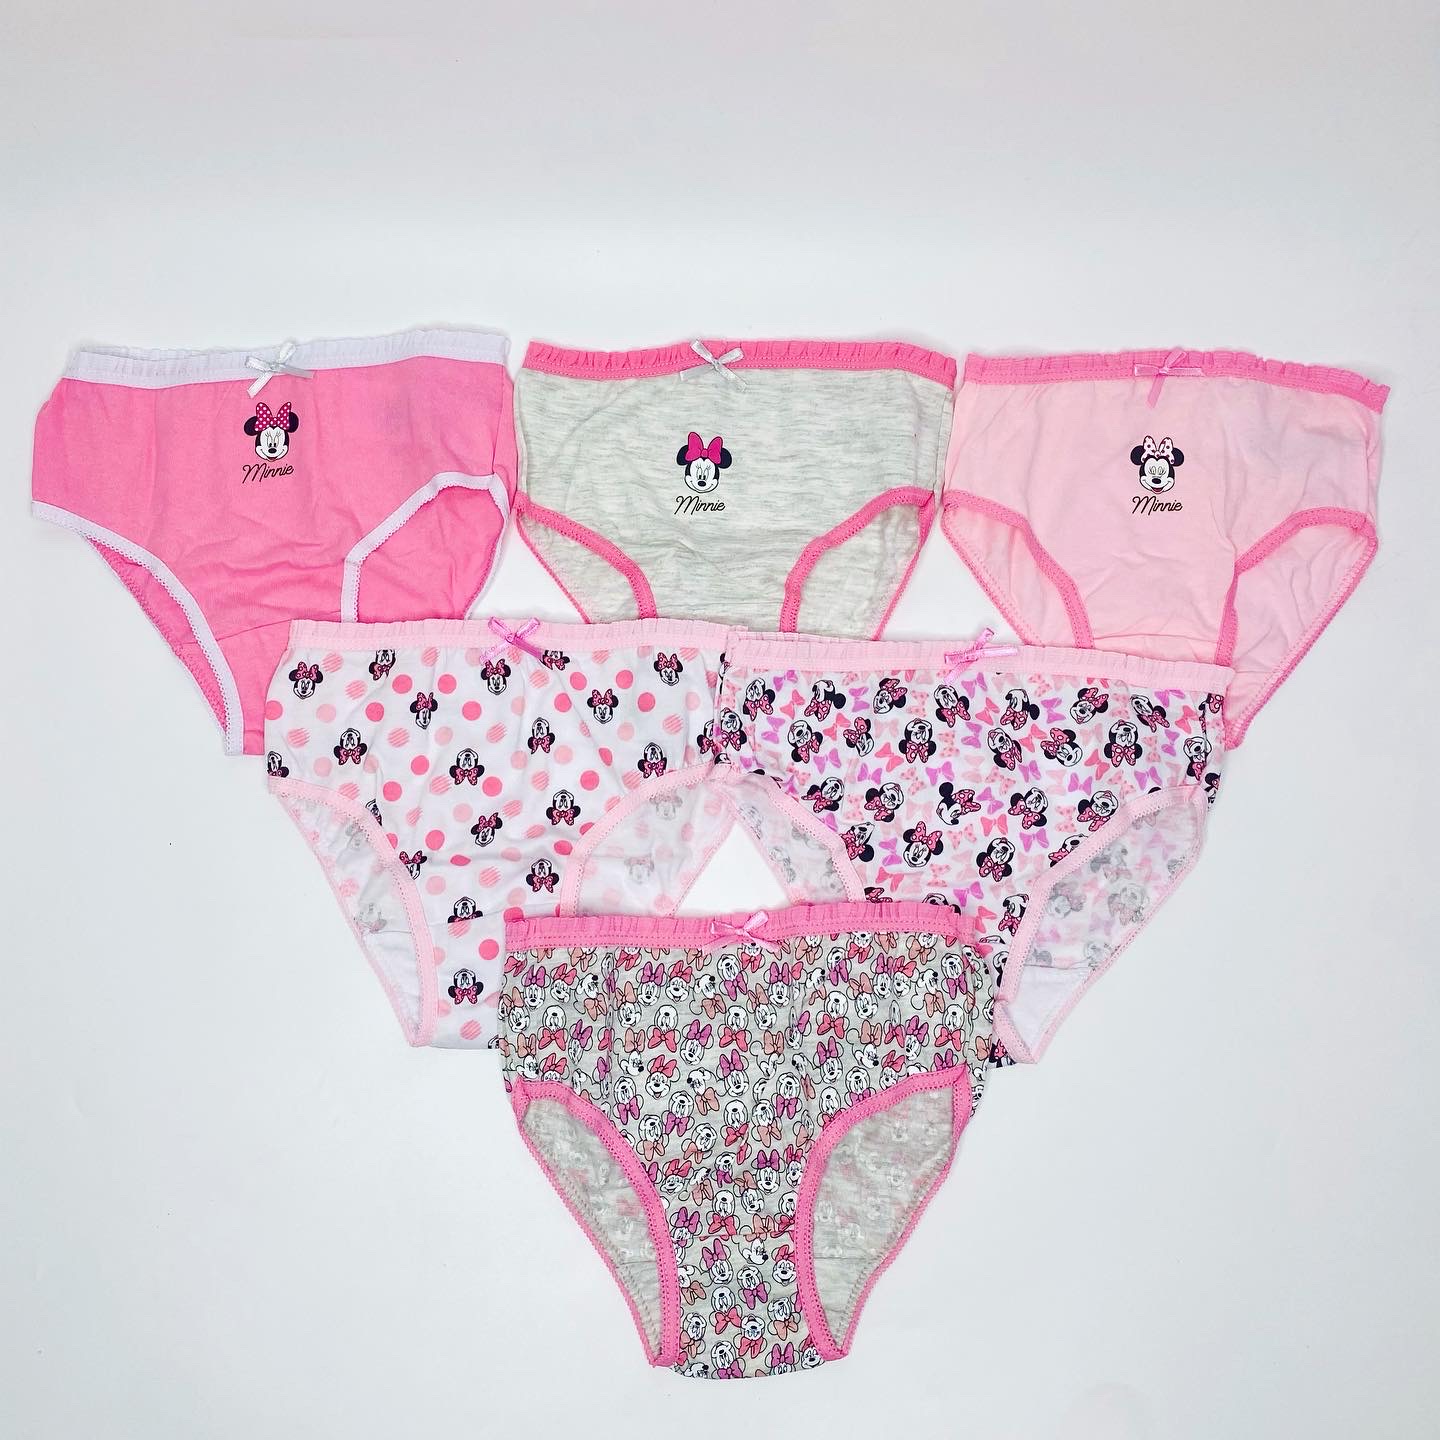 Littletown Primark Toddler Girls Minnie Mouse Hipster Panties, 6-pack -  Online Luxury Store for Kids